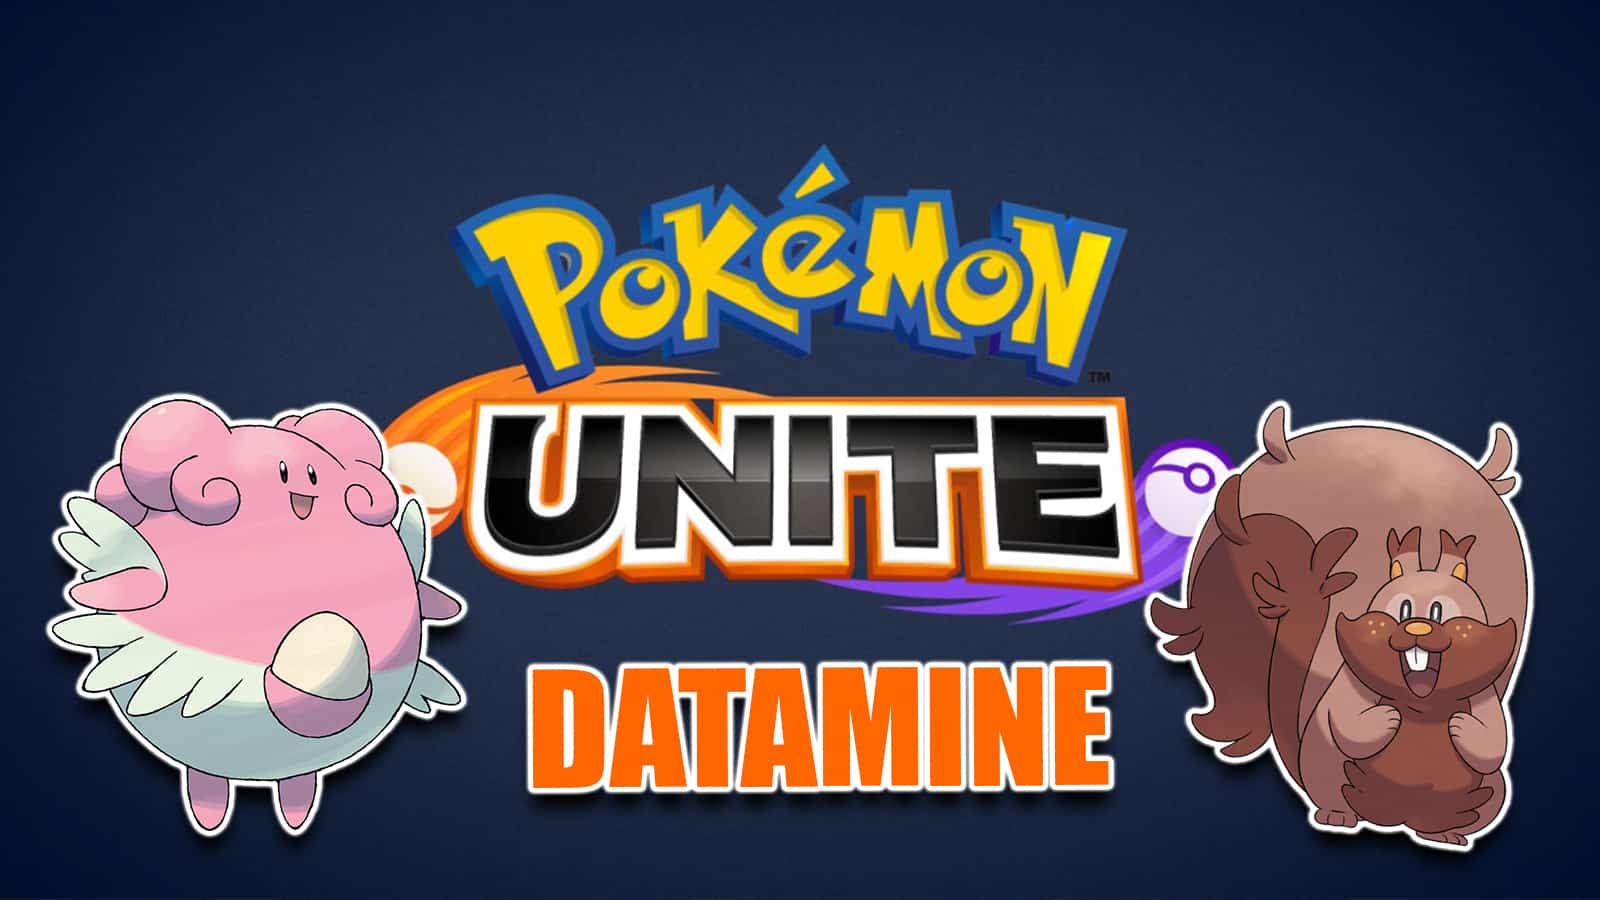 Tier list updated with the best Pokémon Unite characters in June